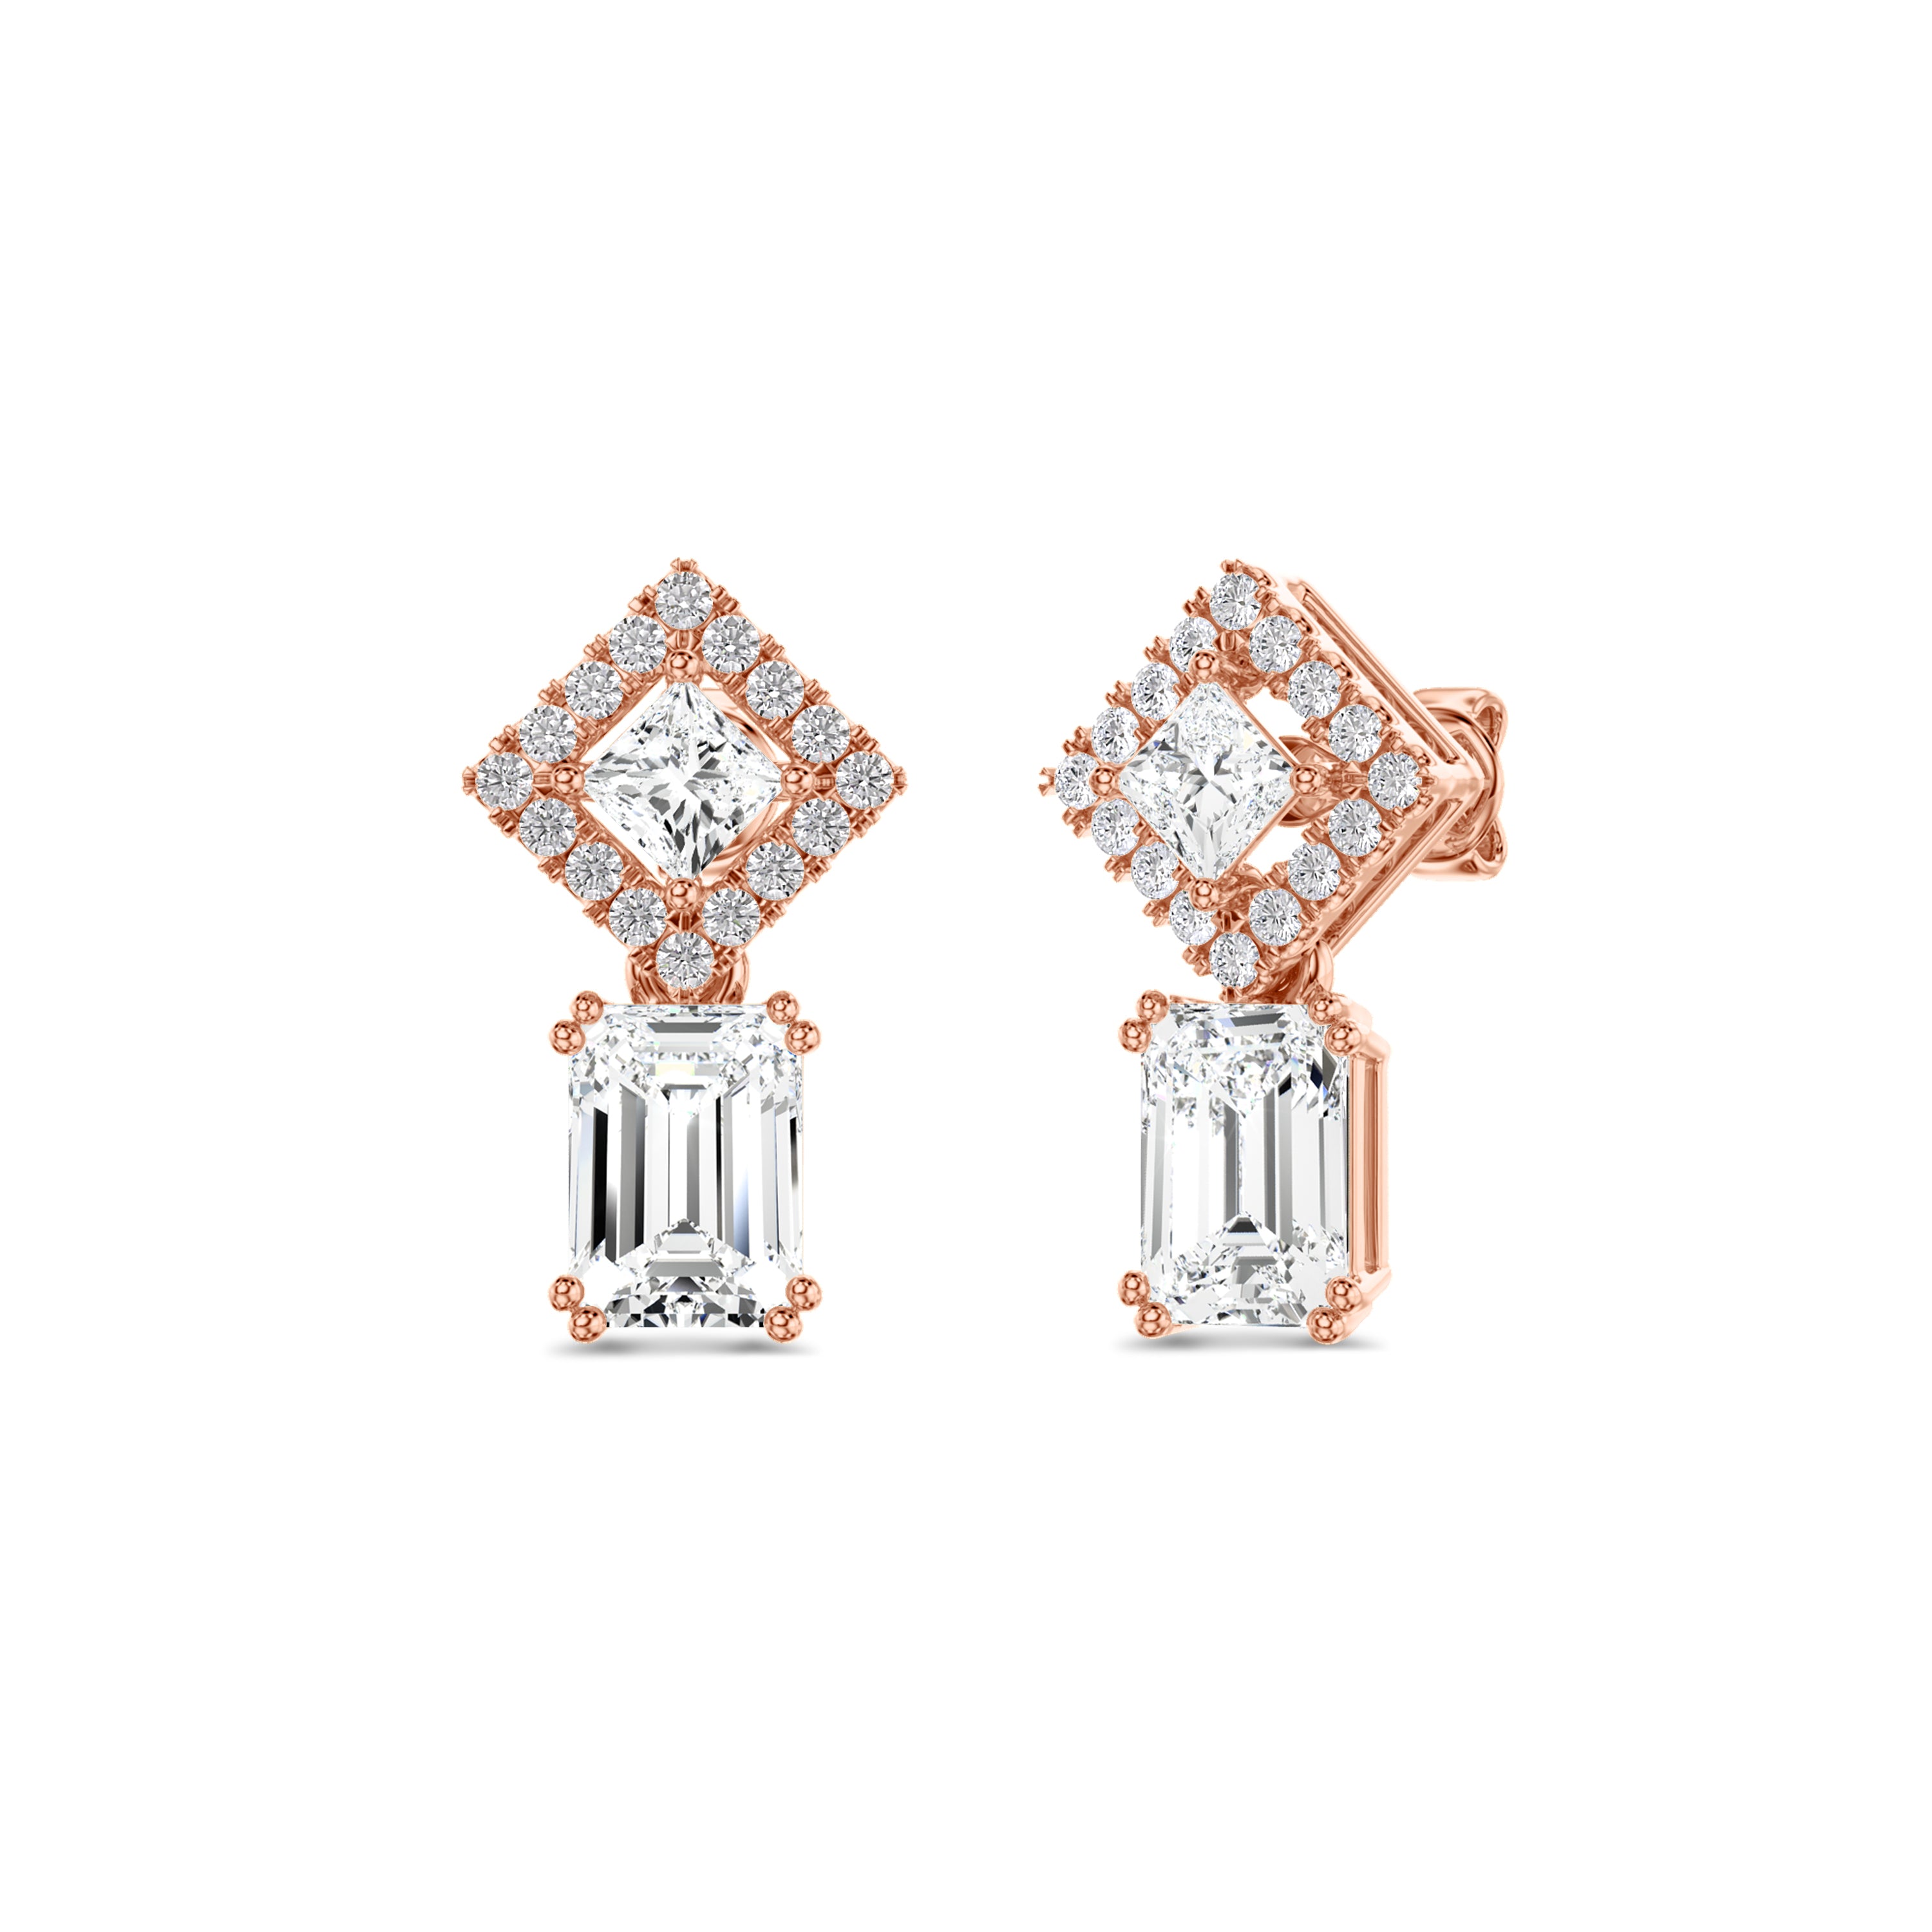 Verve Solitaire Earring